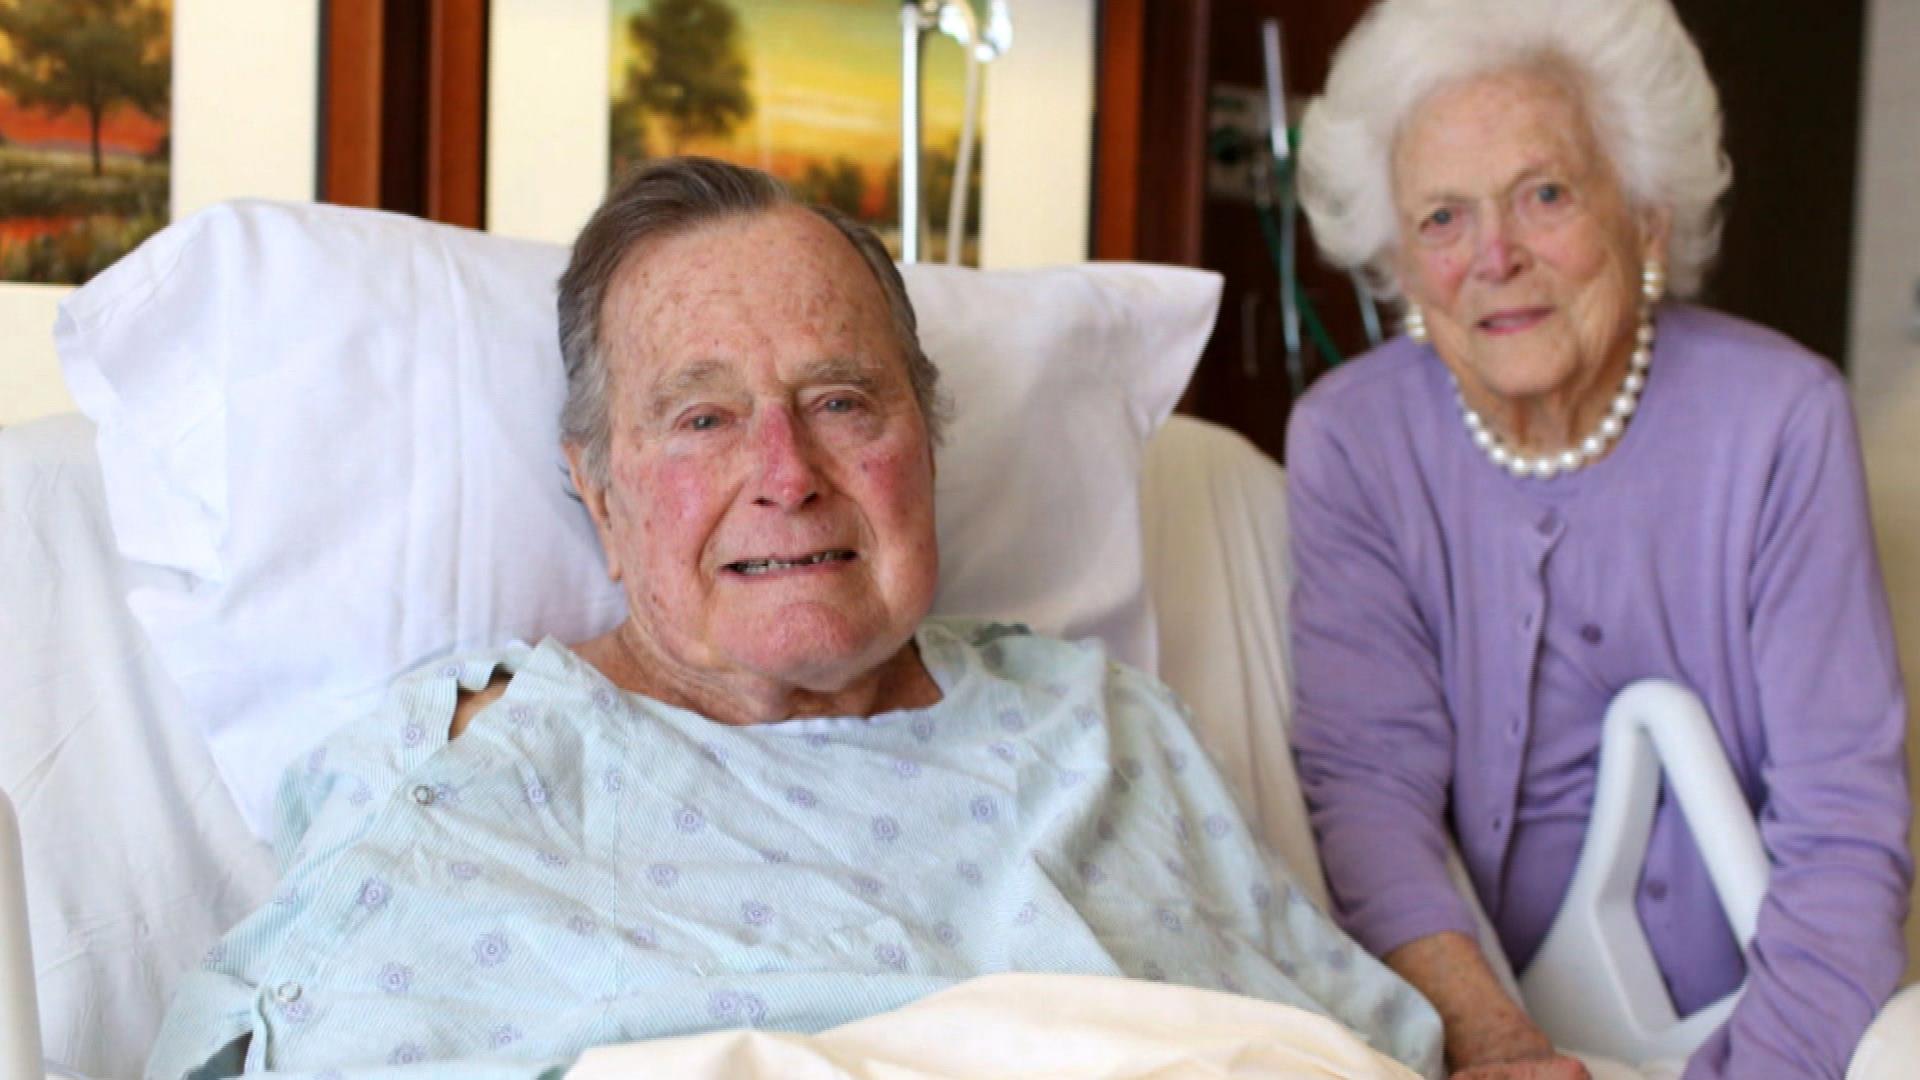 President Bush released from hospital after battle with pneumonia